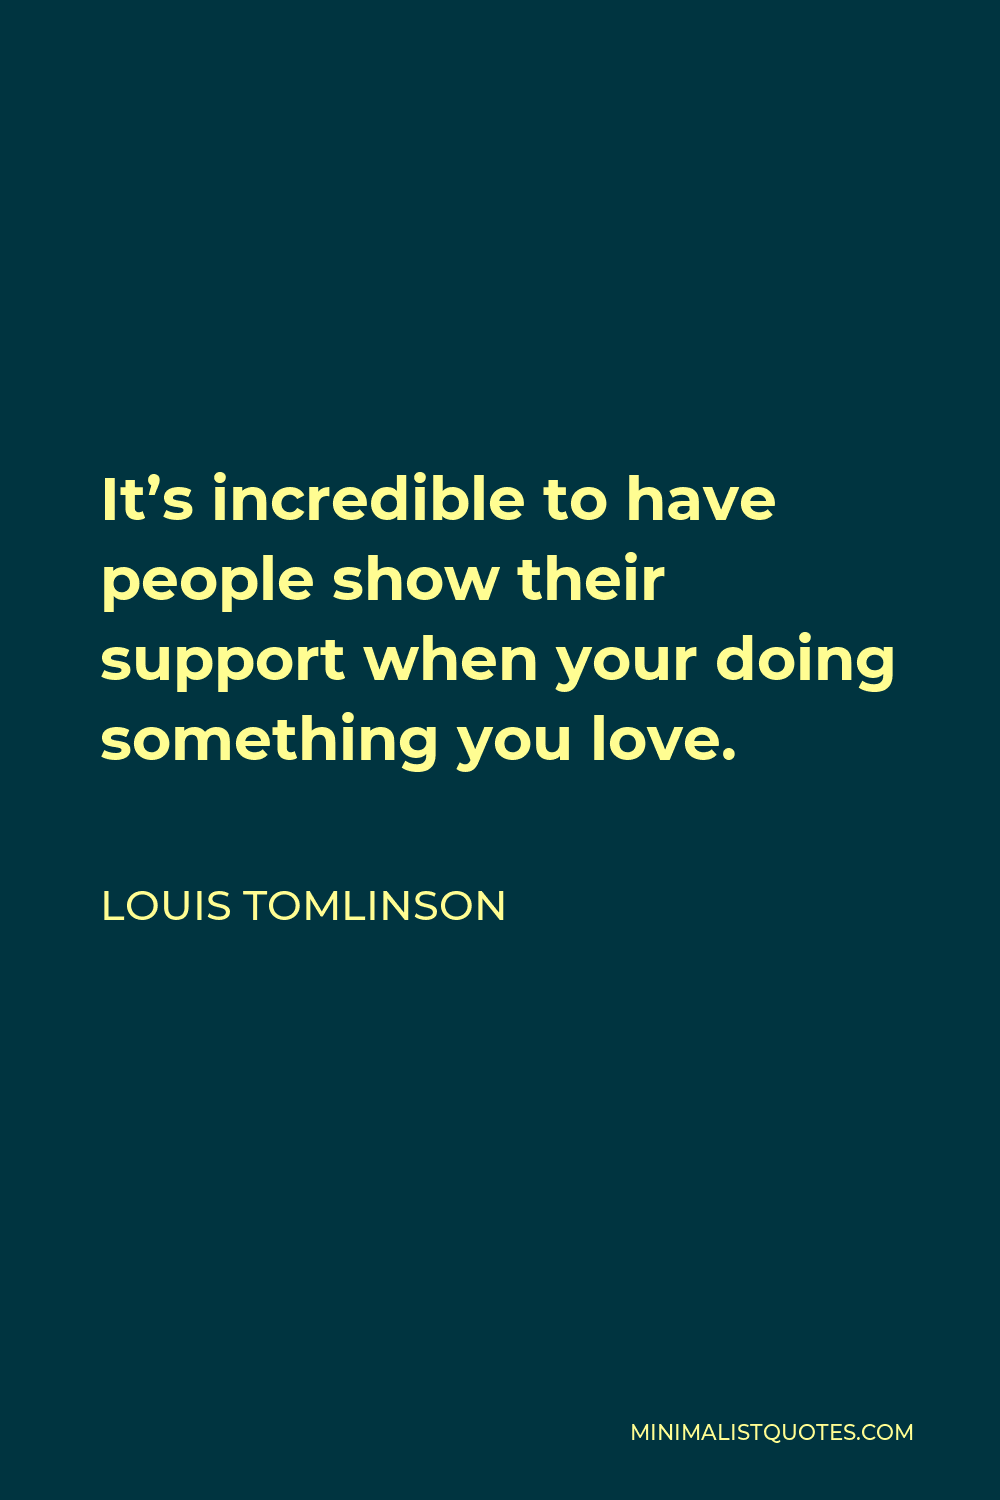 Louis Tomlinson Quote - It’s incredible to have people show their support when your doing something you love.